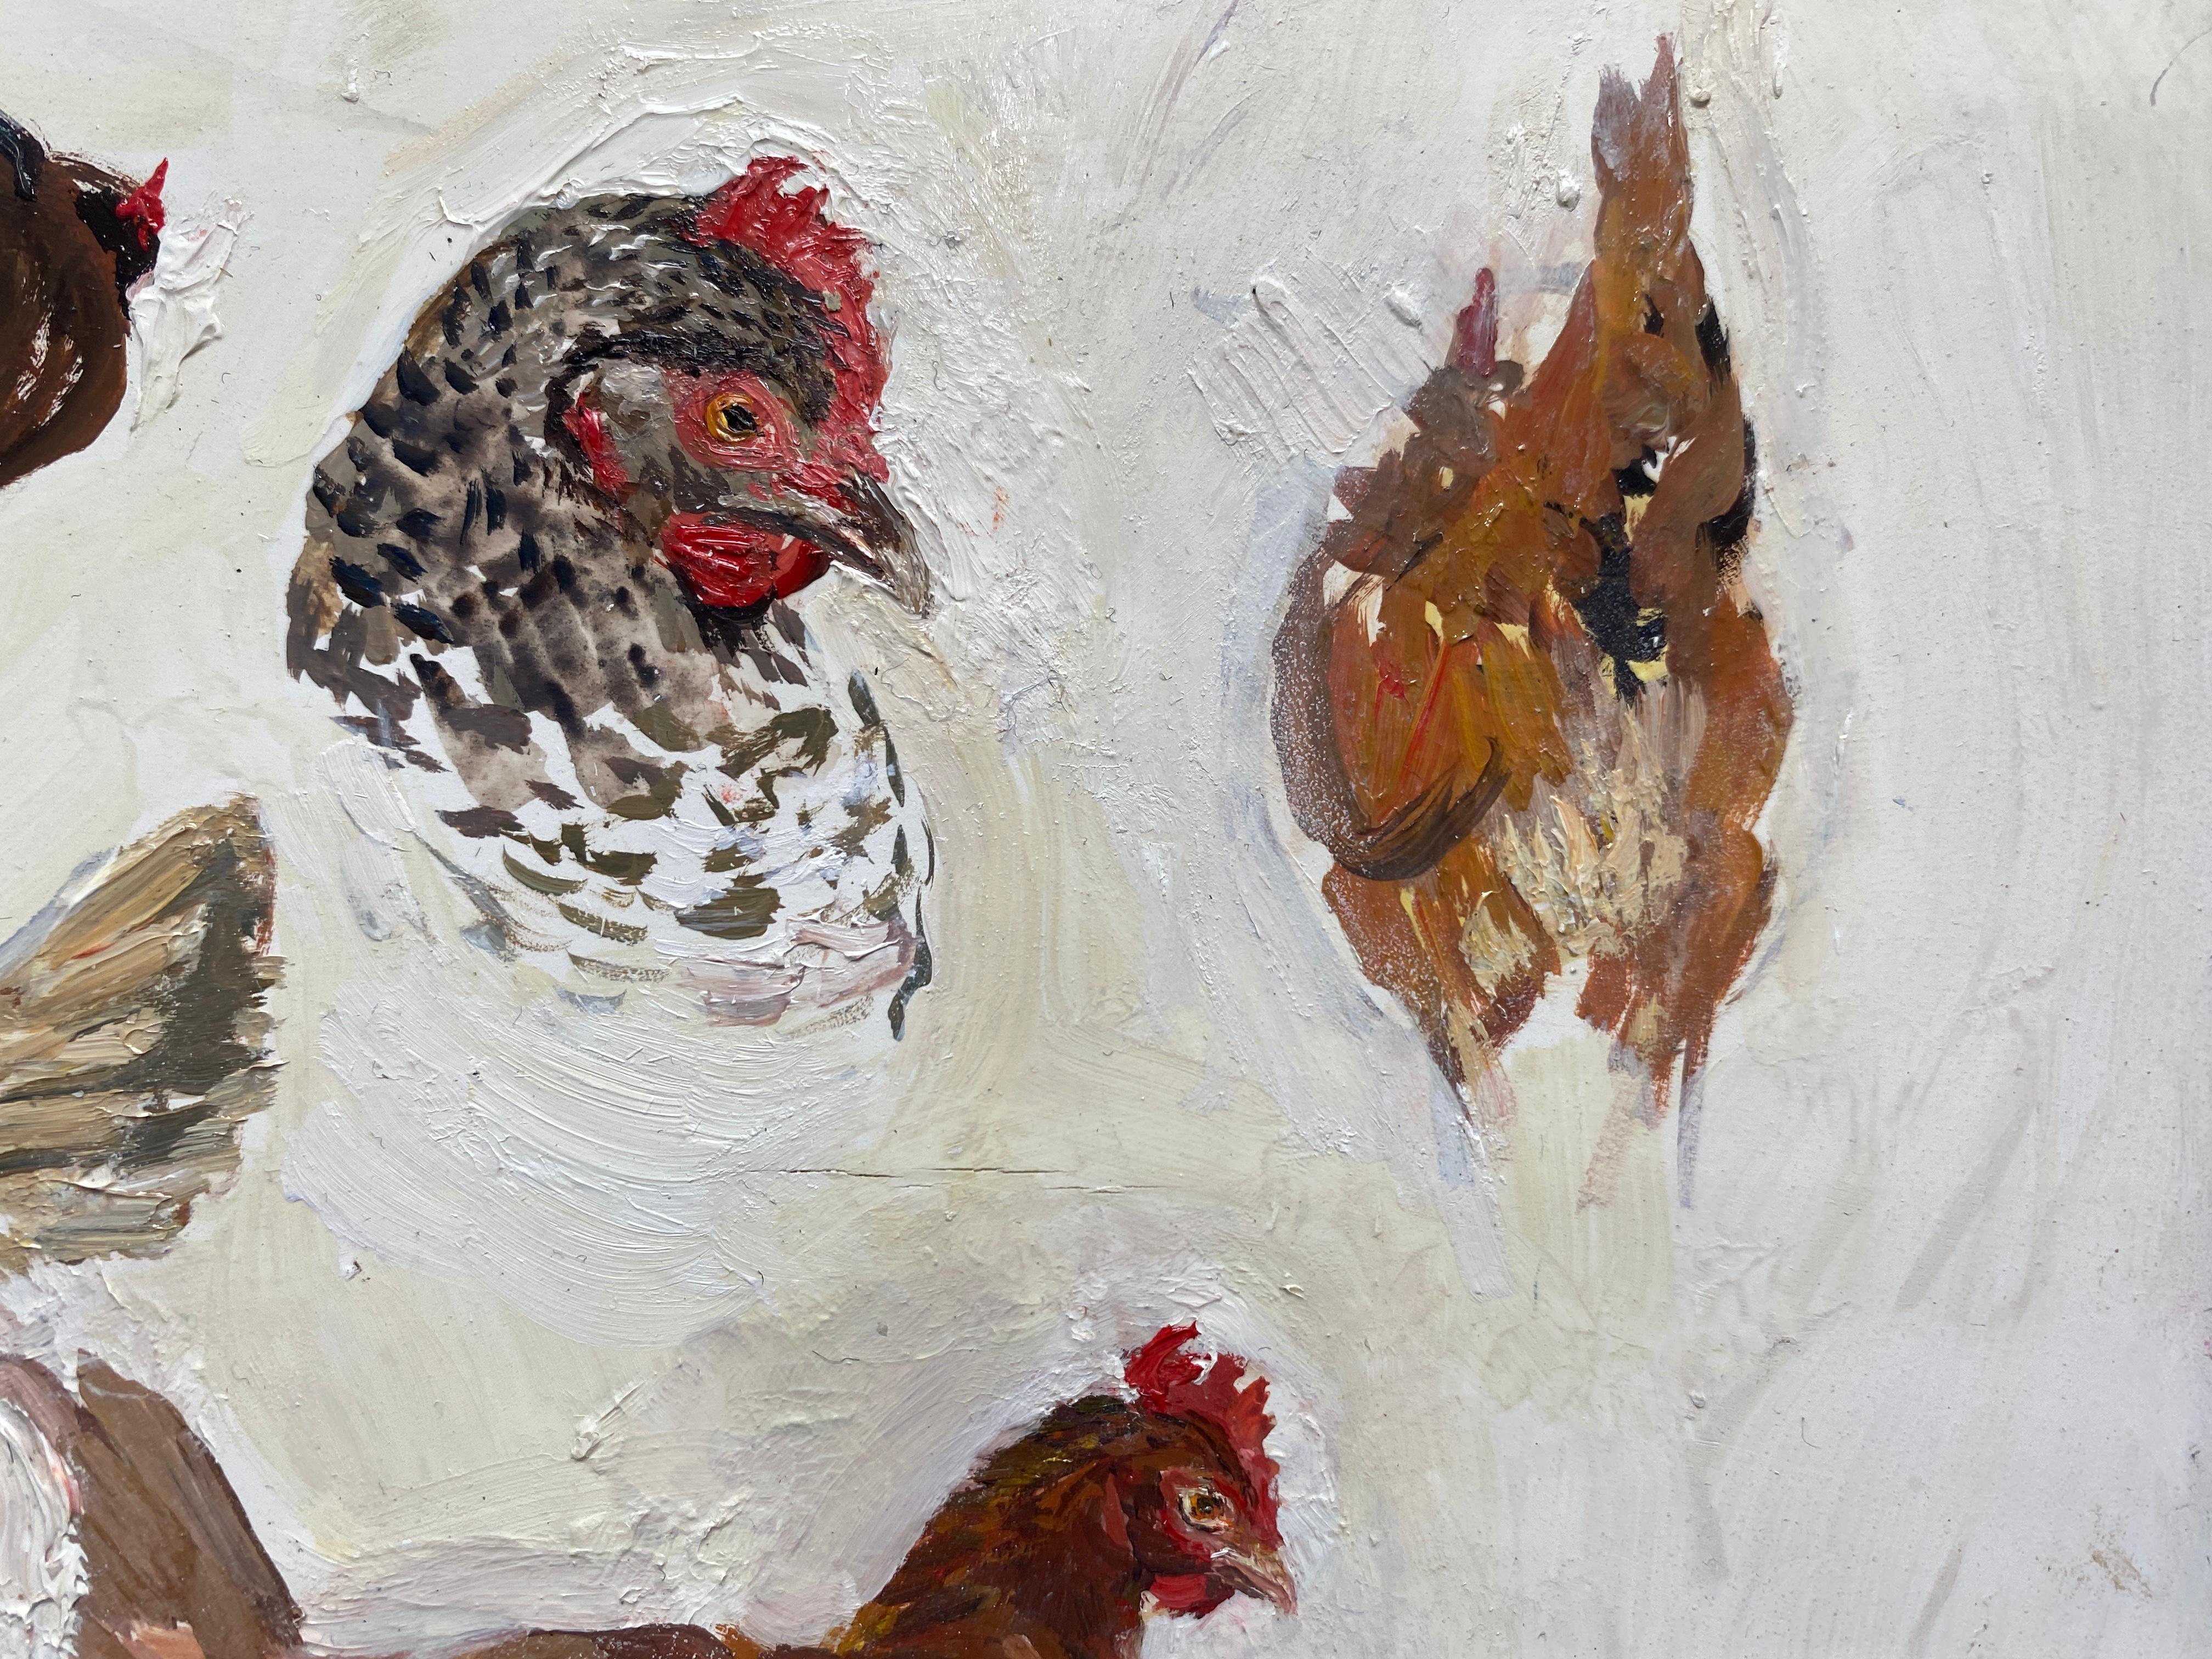 An oil painting of Hens and chickens on a white background. The artist studied farm animals, and painted multiple small sketches on one panel, to better understand her subject from all angles. With strong attention to detail, we see impasto and